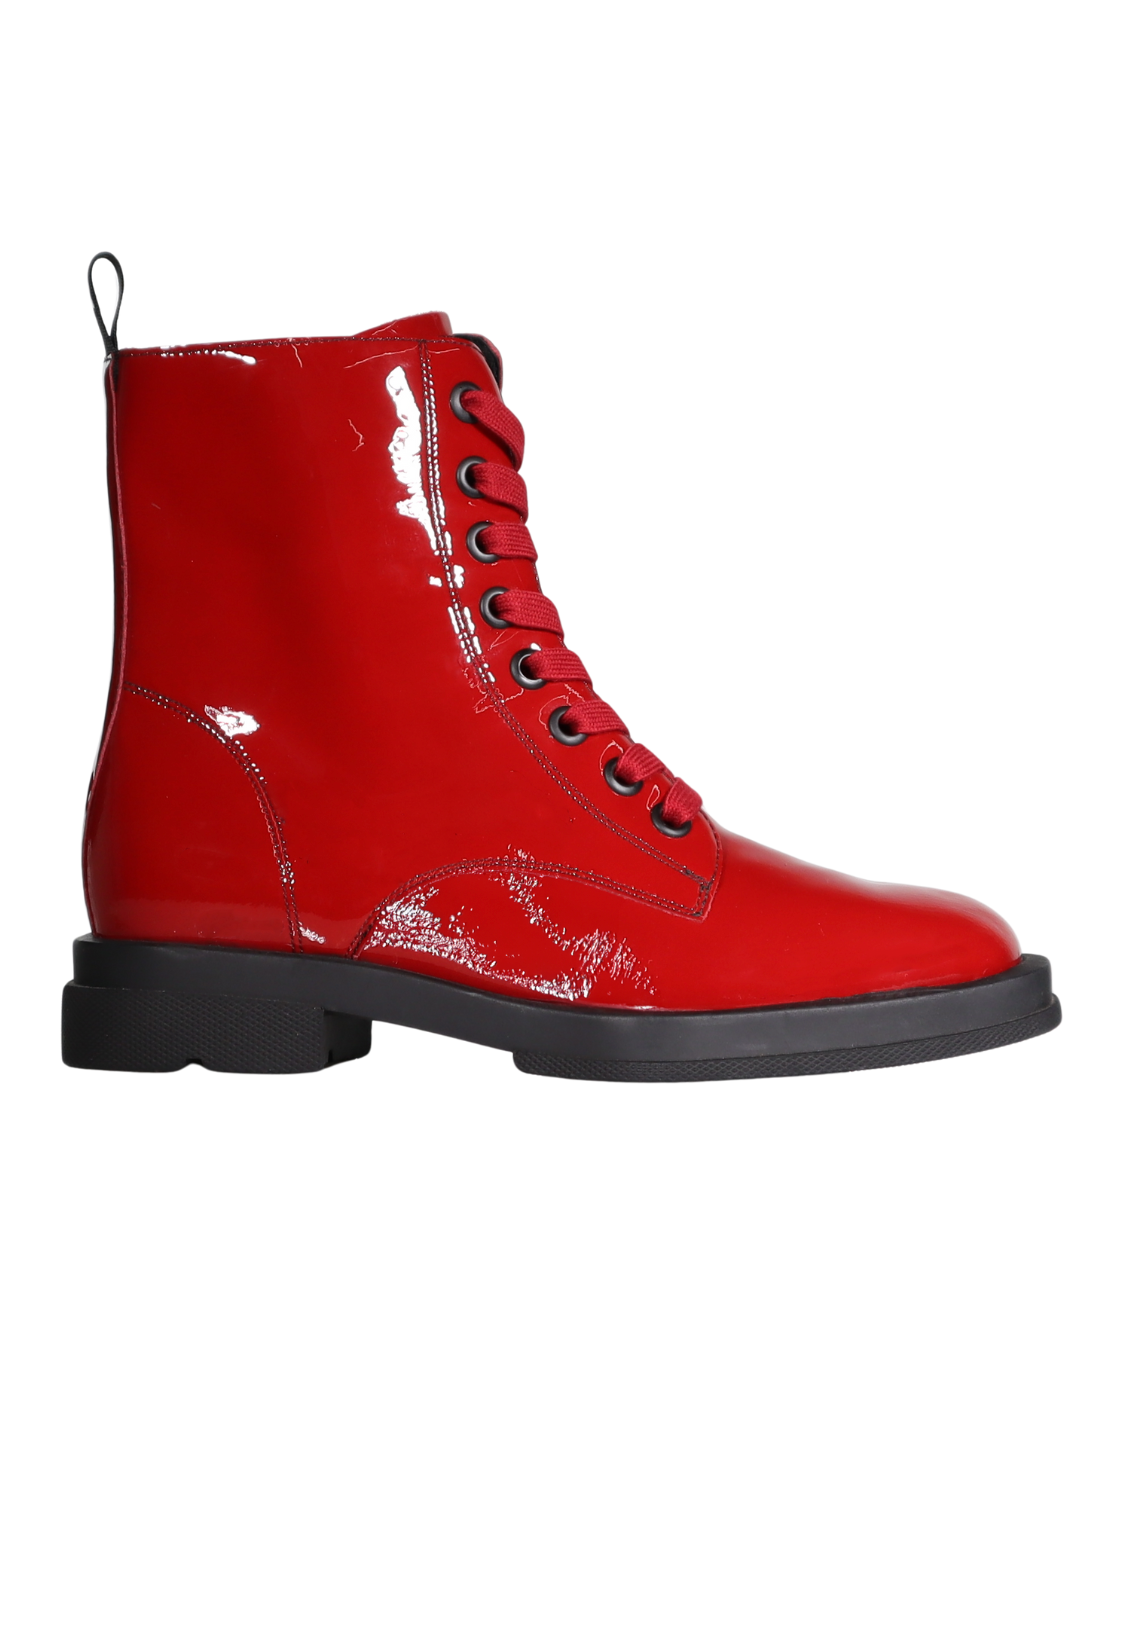 MINX MILLIE - WINTER RED CRINKLE PATENT - THE VOGUE STORE